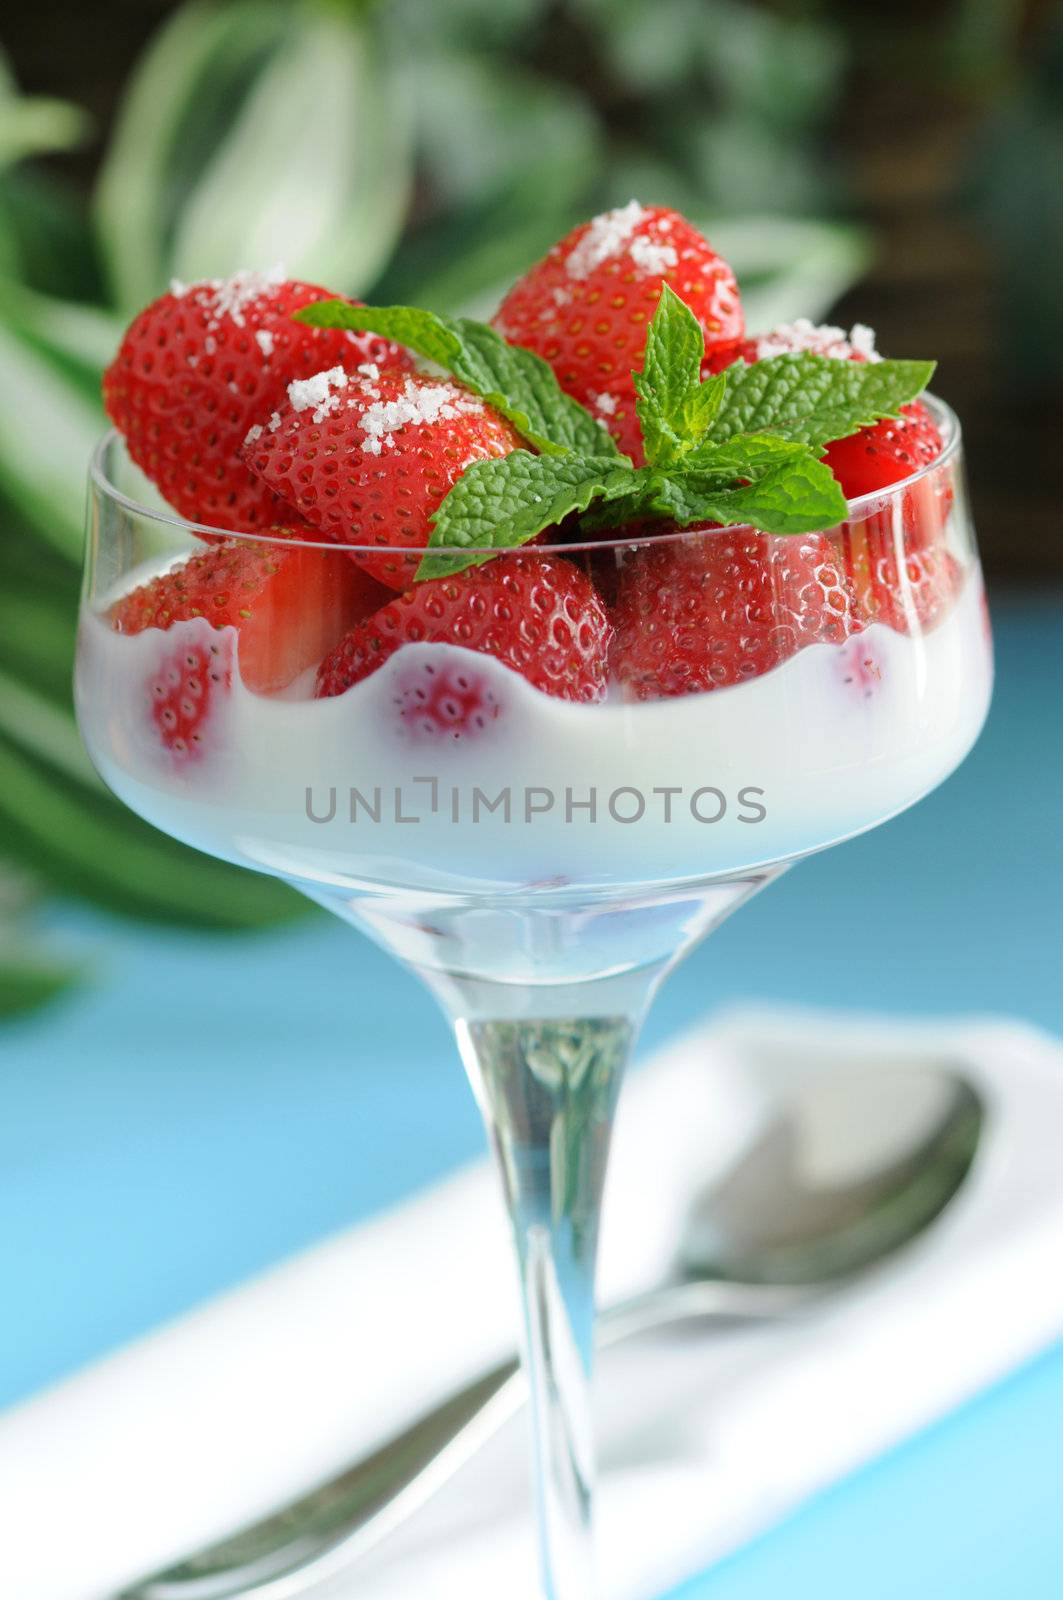 Fresh Strawberries and Cream by billberryphotography